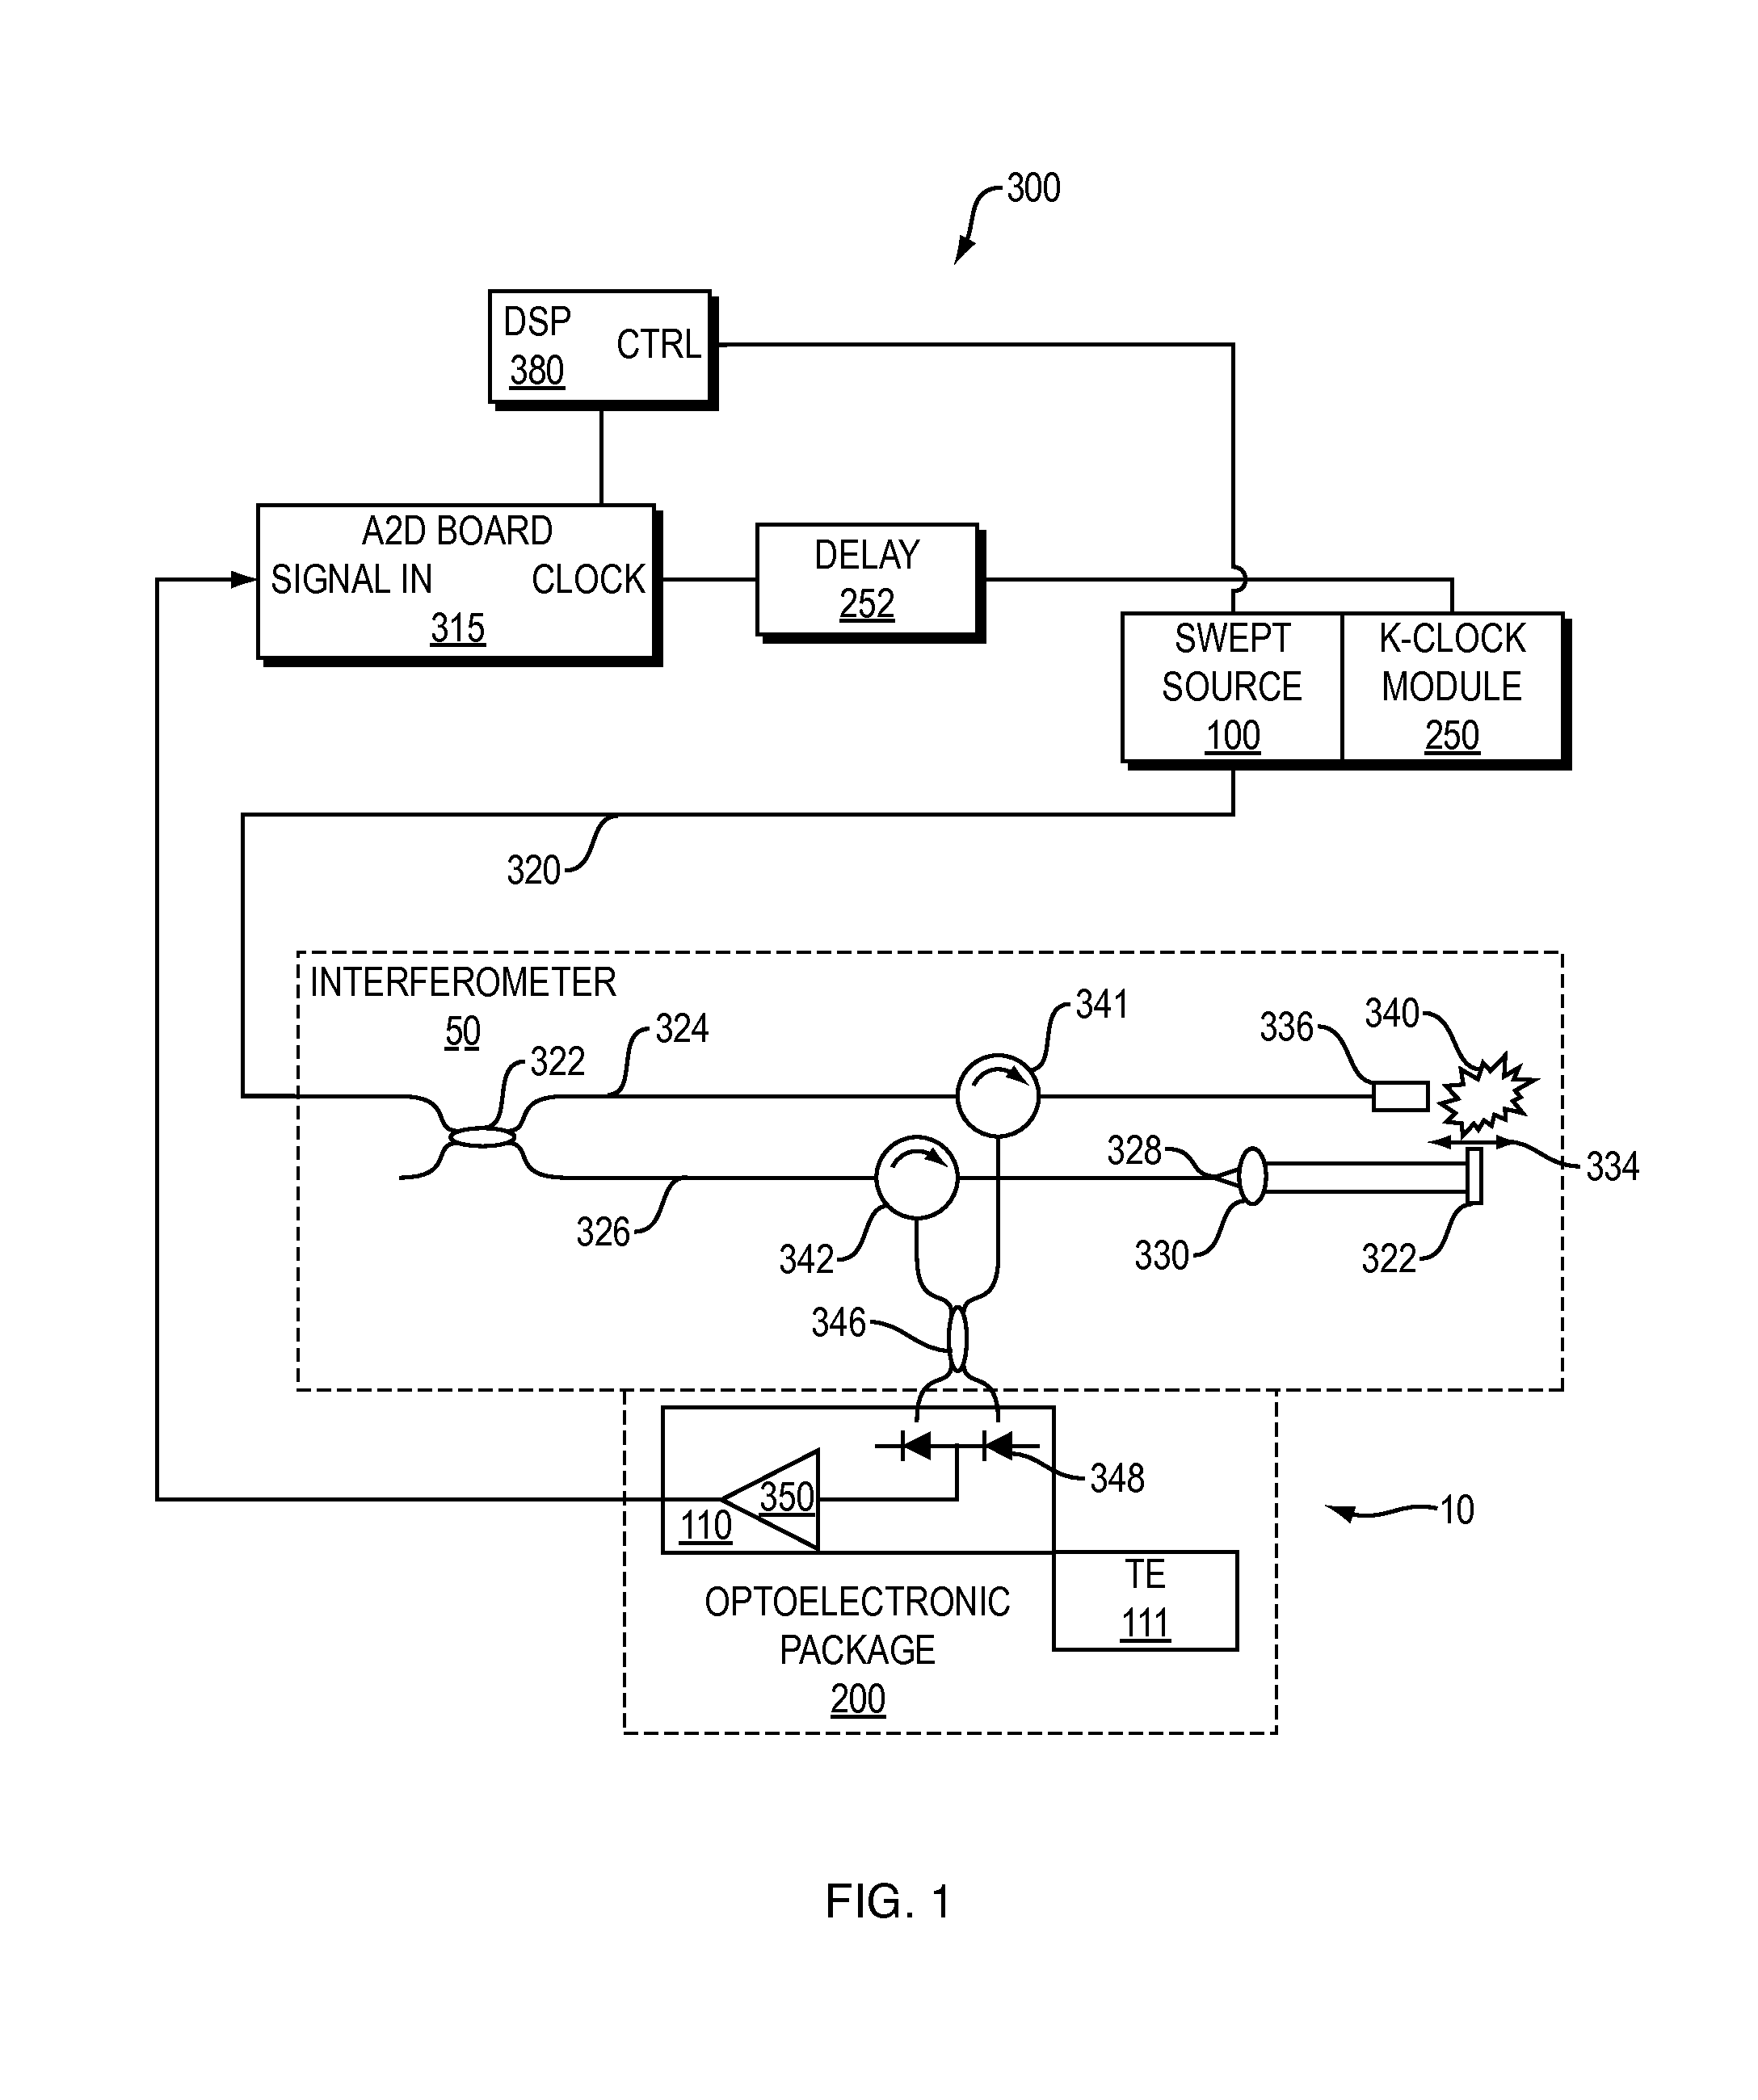 Integrated OCT detector system with transimpedance amplifier